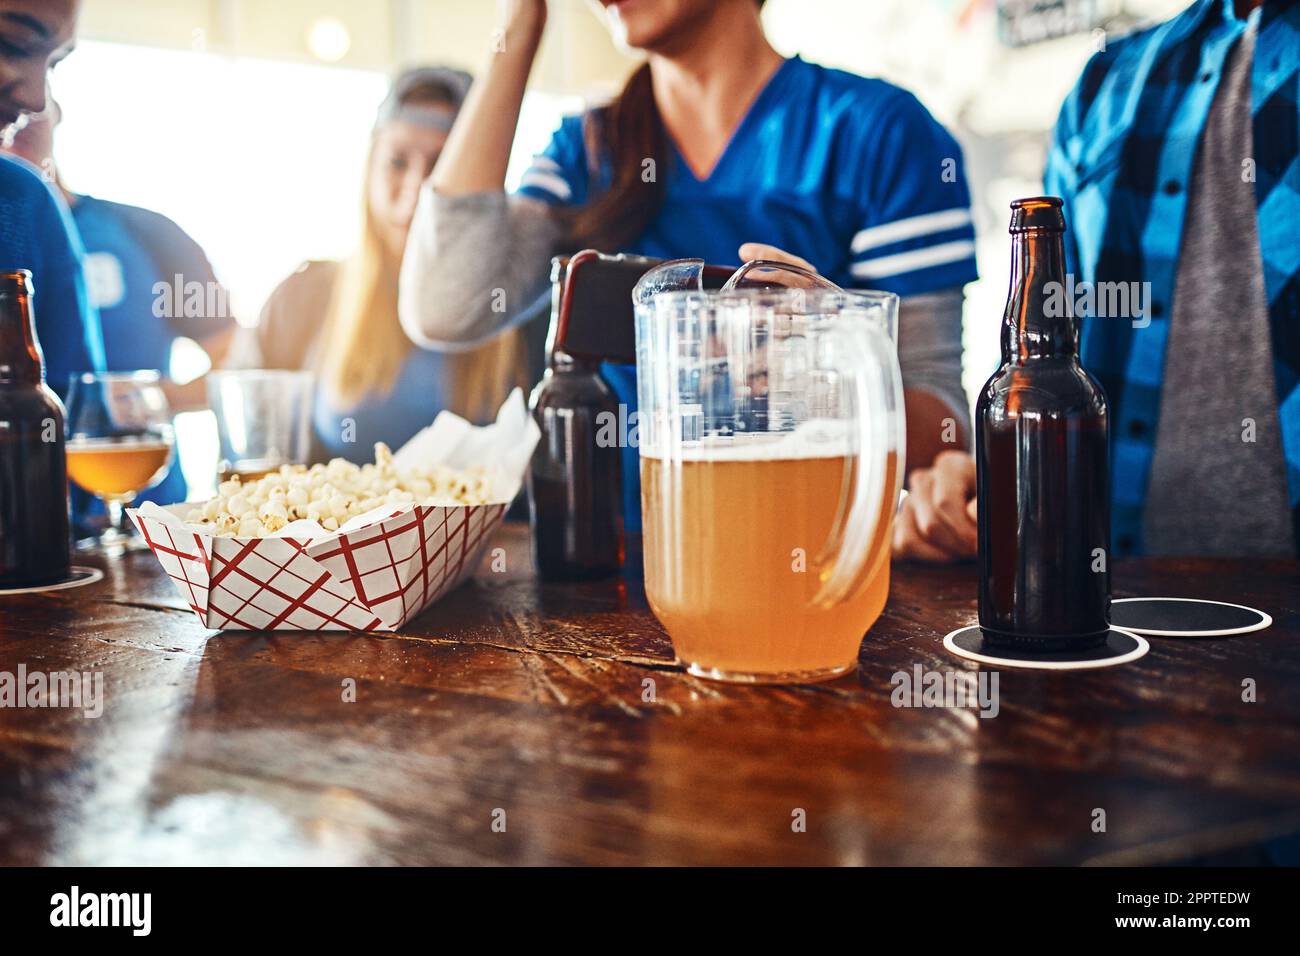 Its not a game without drinks and snacks. a jug of beer and popcorn on a counter at a sports bar. Stock Photo